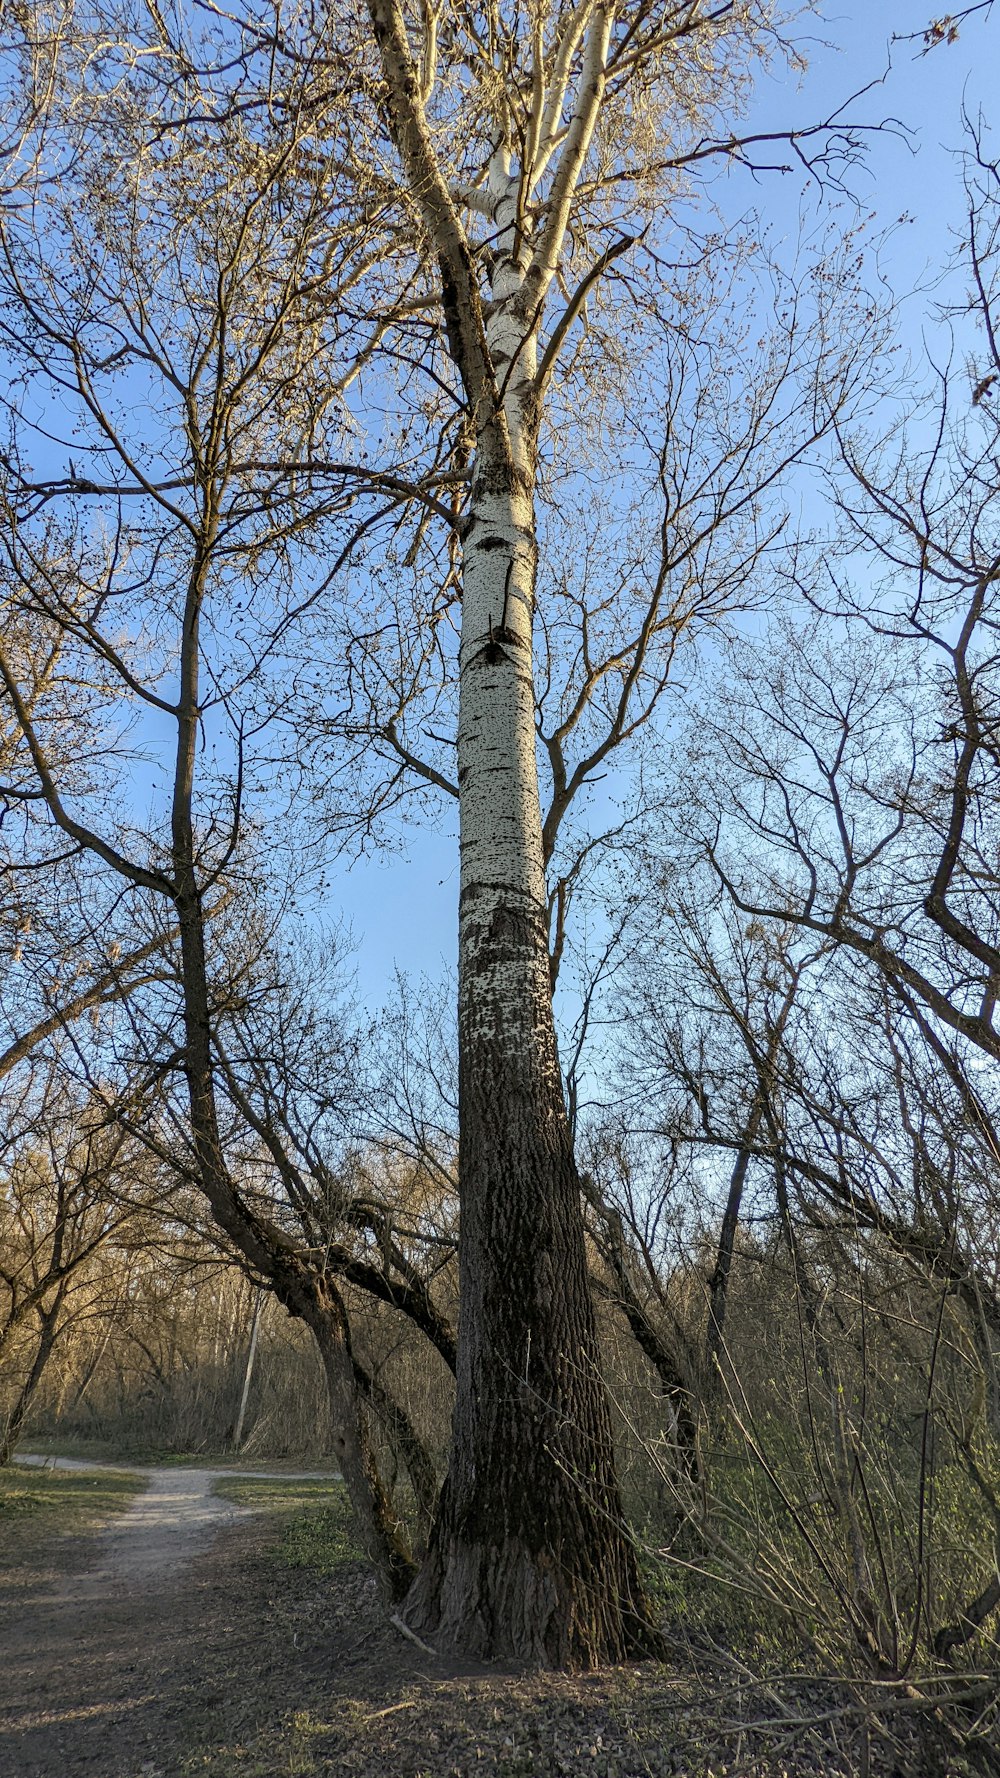 a tree with no leaves on it near a dirt road